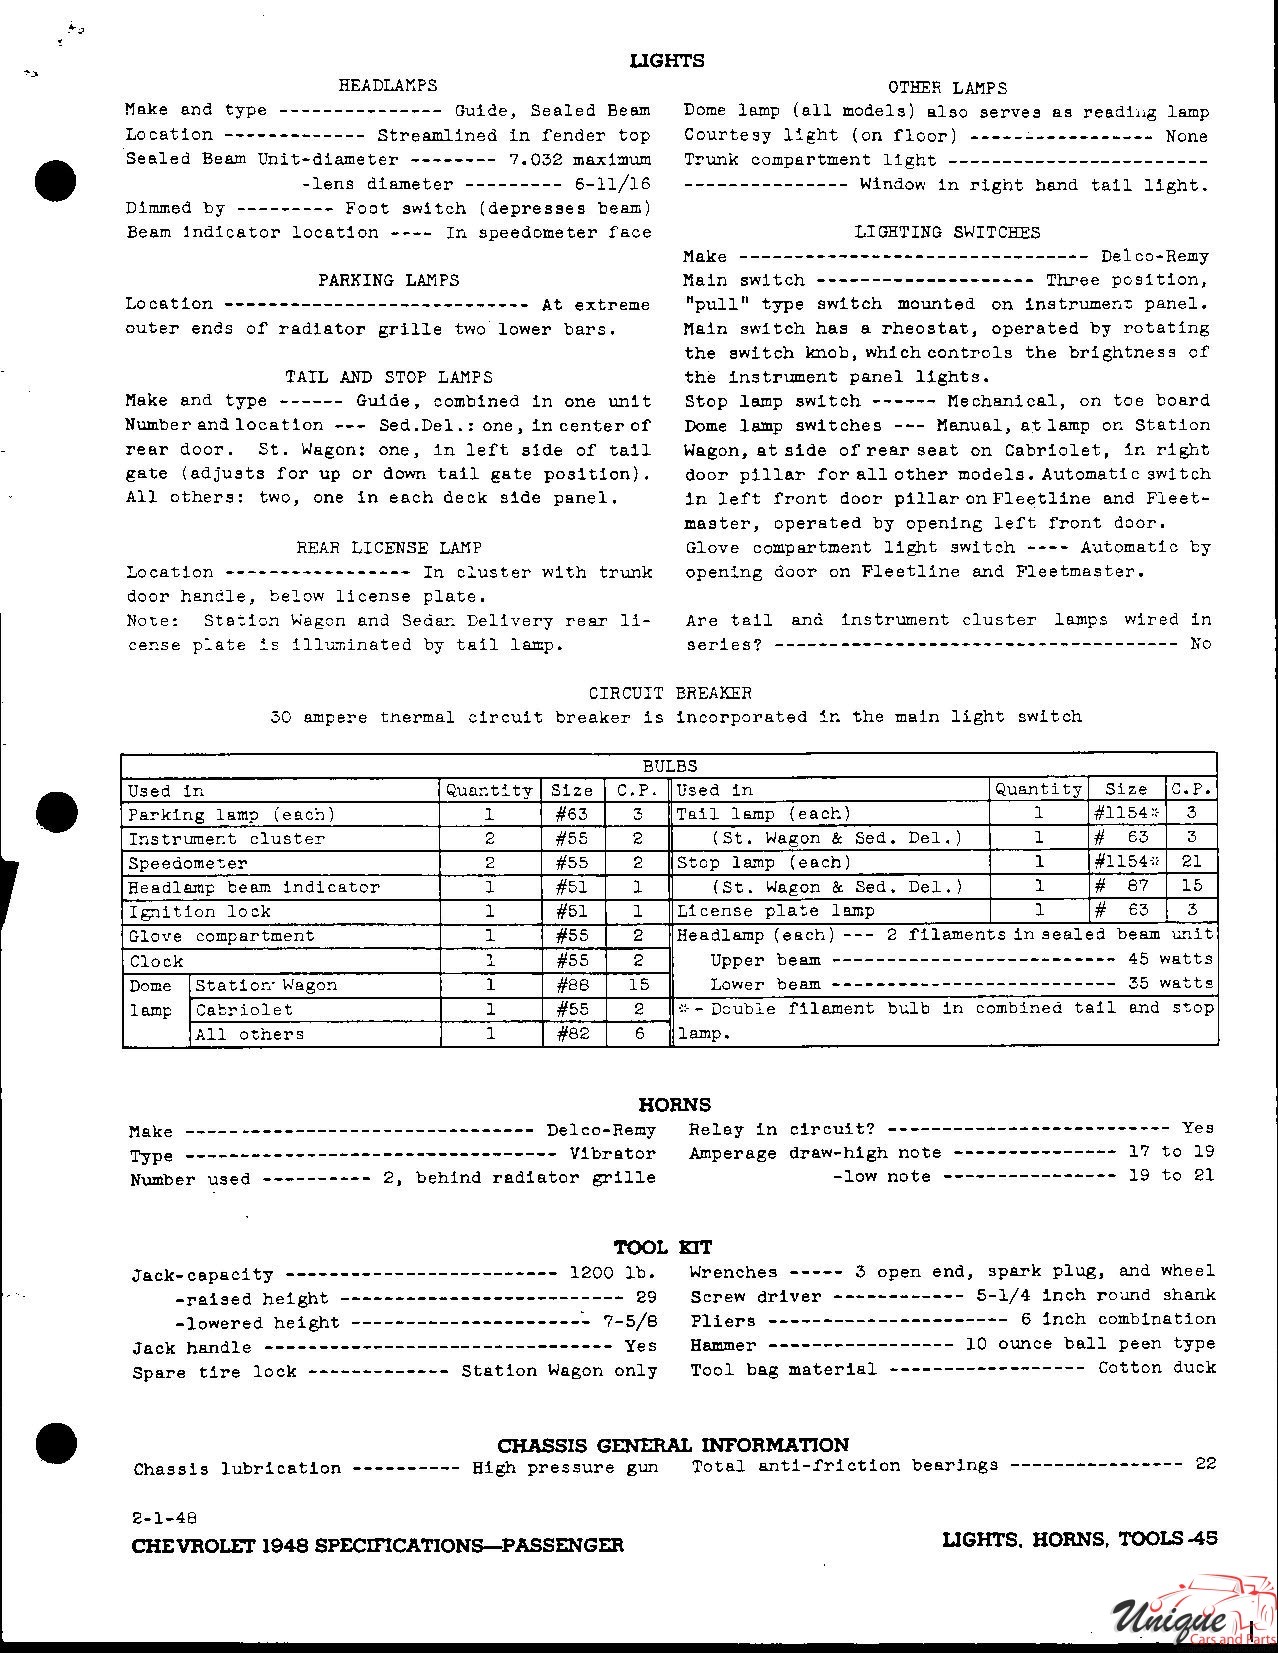 1948 Chevrolet Specifications Page 18